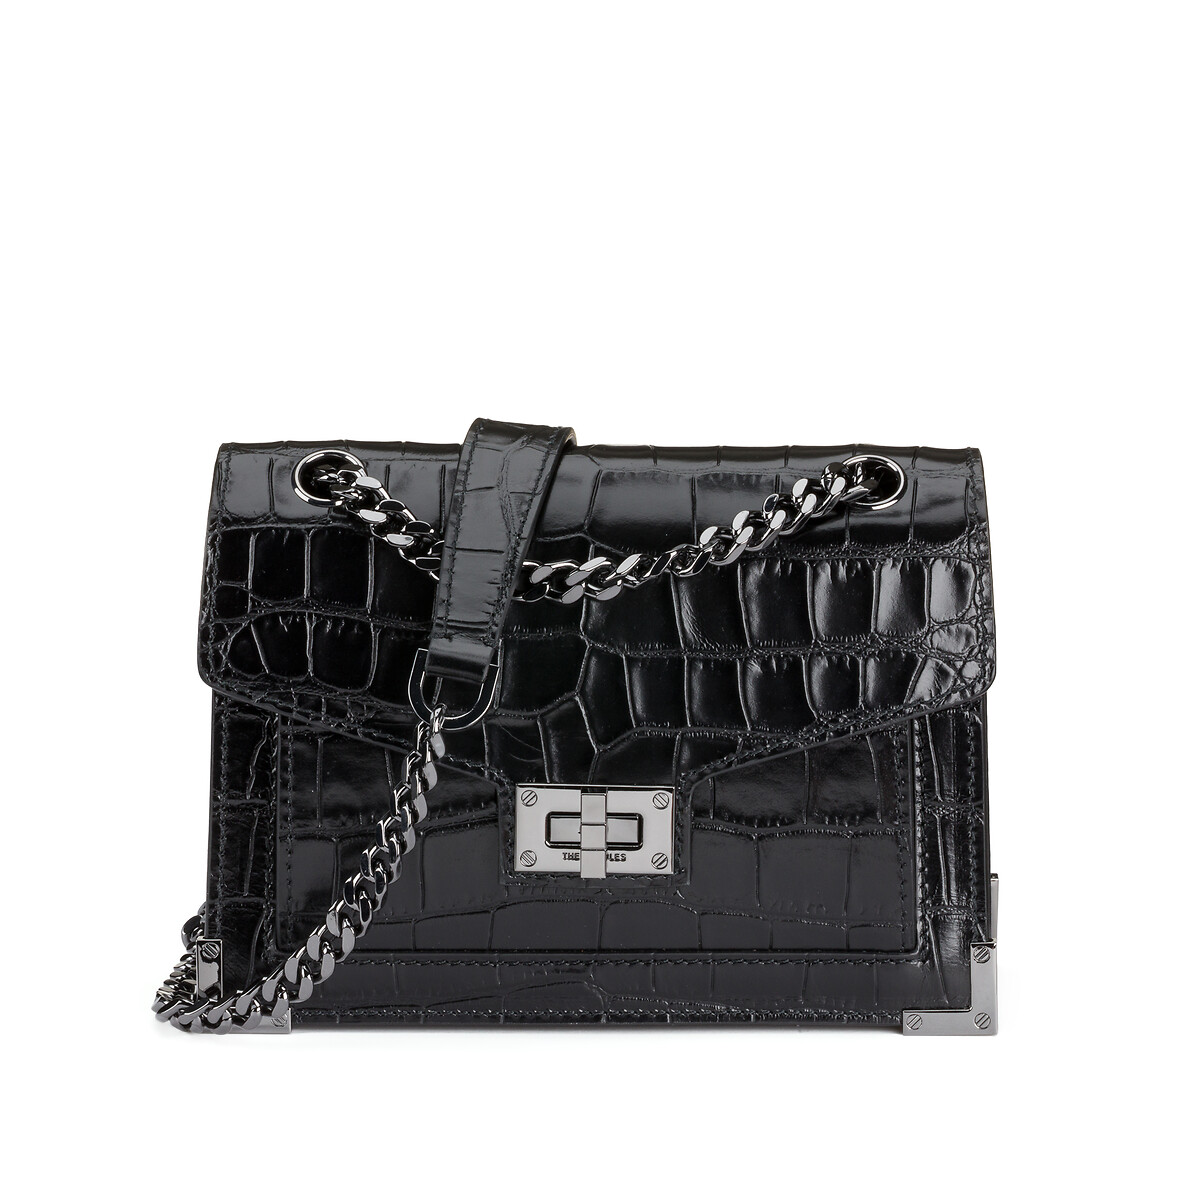 Emily Handbag in Mock Croc Leather with Chain Strap